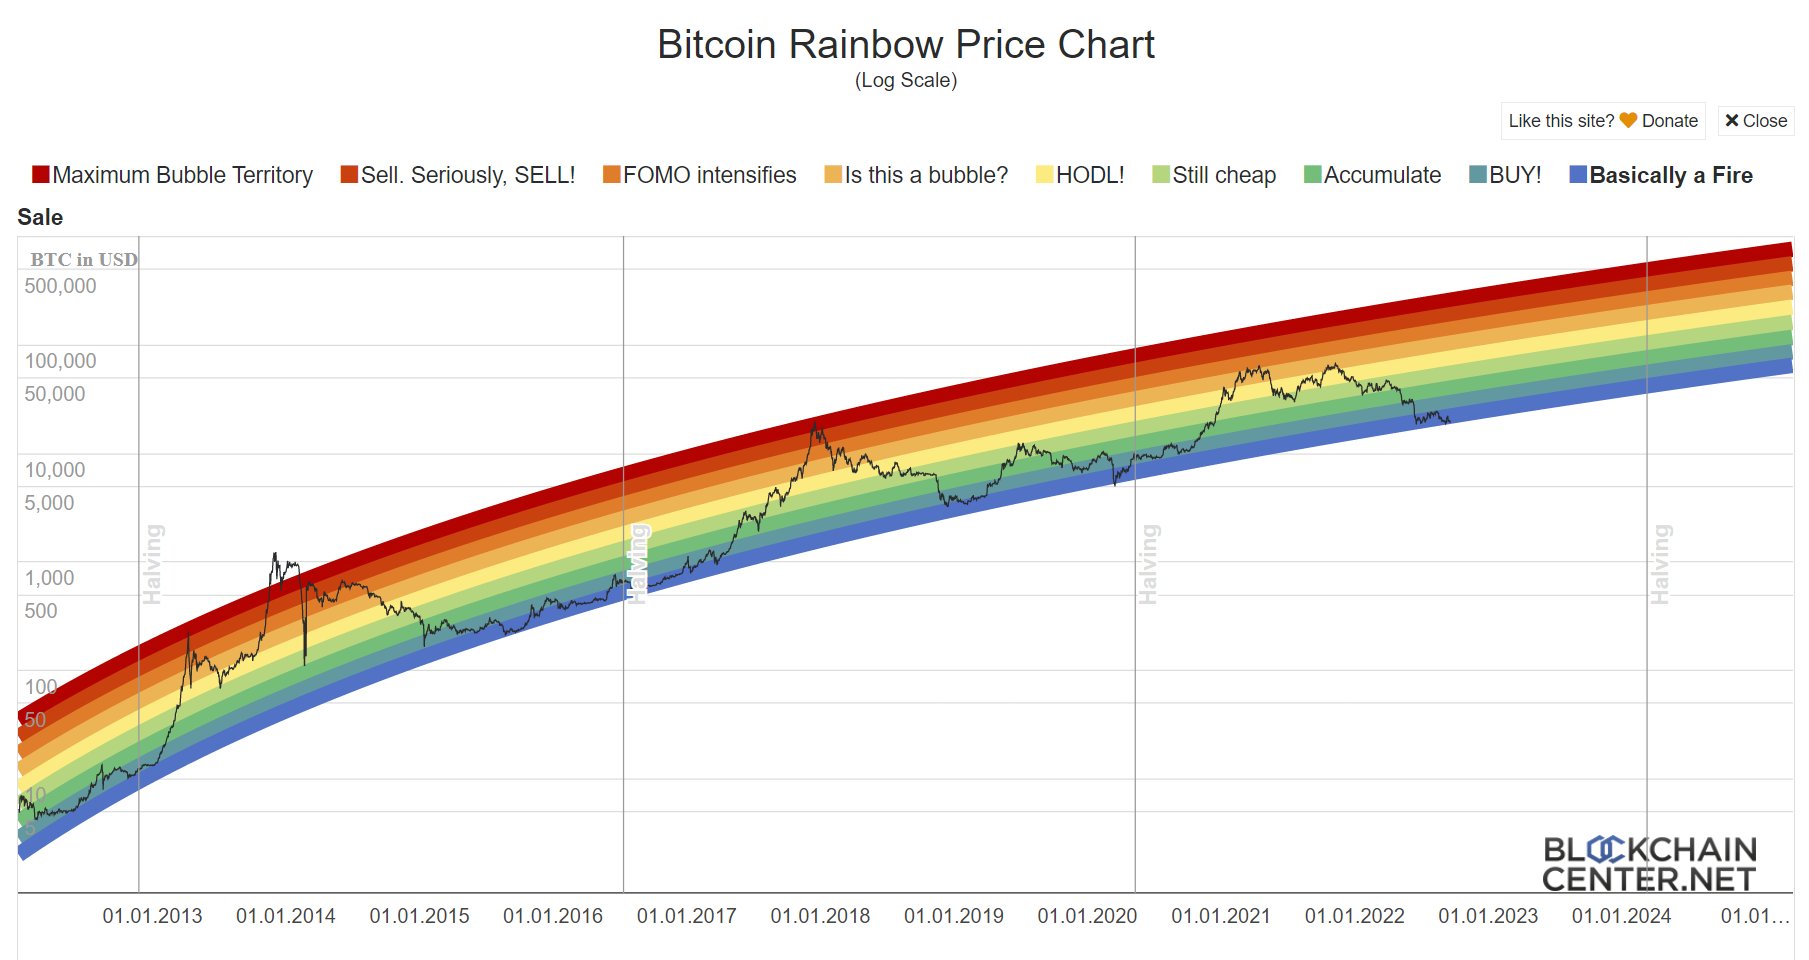 Want To Predict Bitcoin Tops And Bottoms? ‘The Rainbow Chart’ Is For You